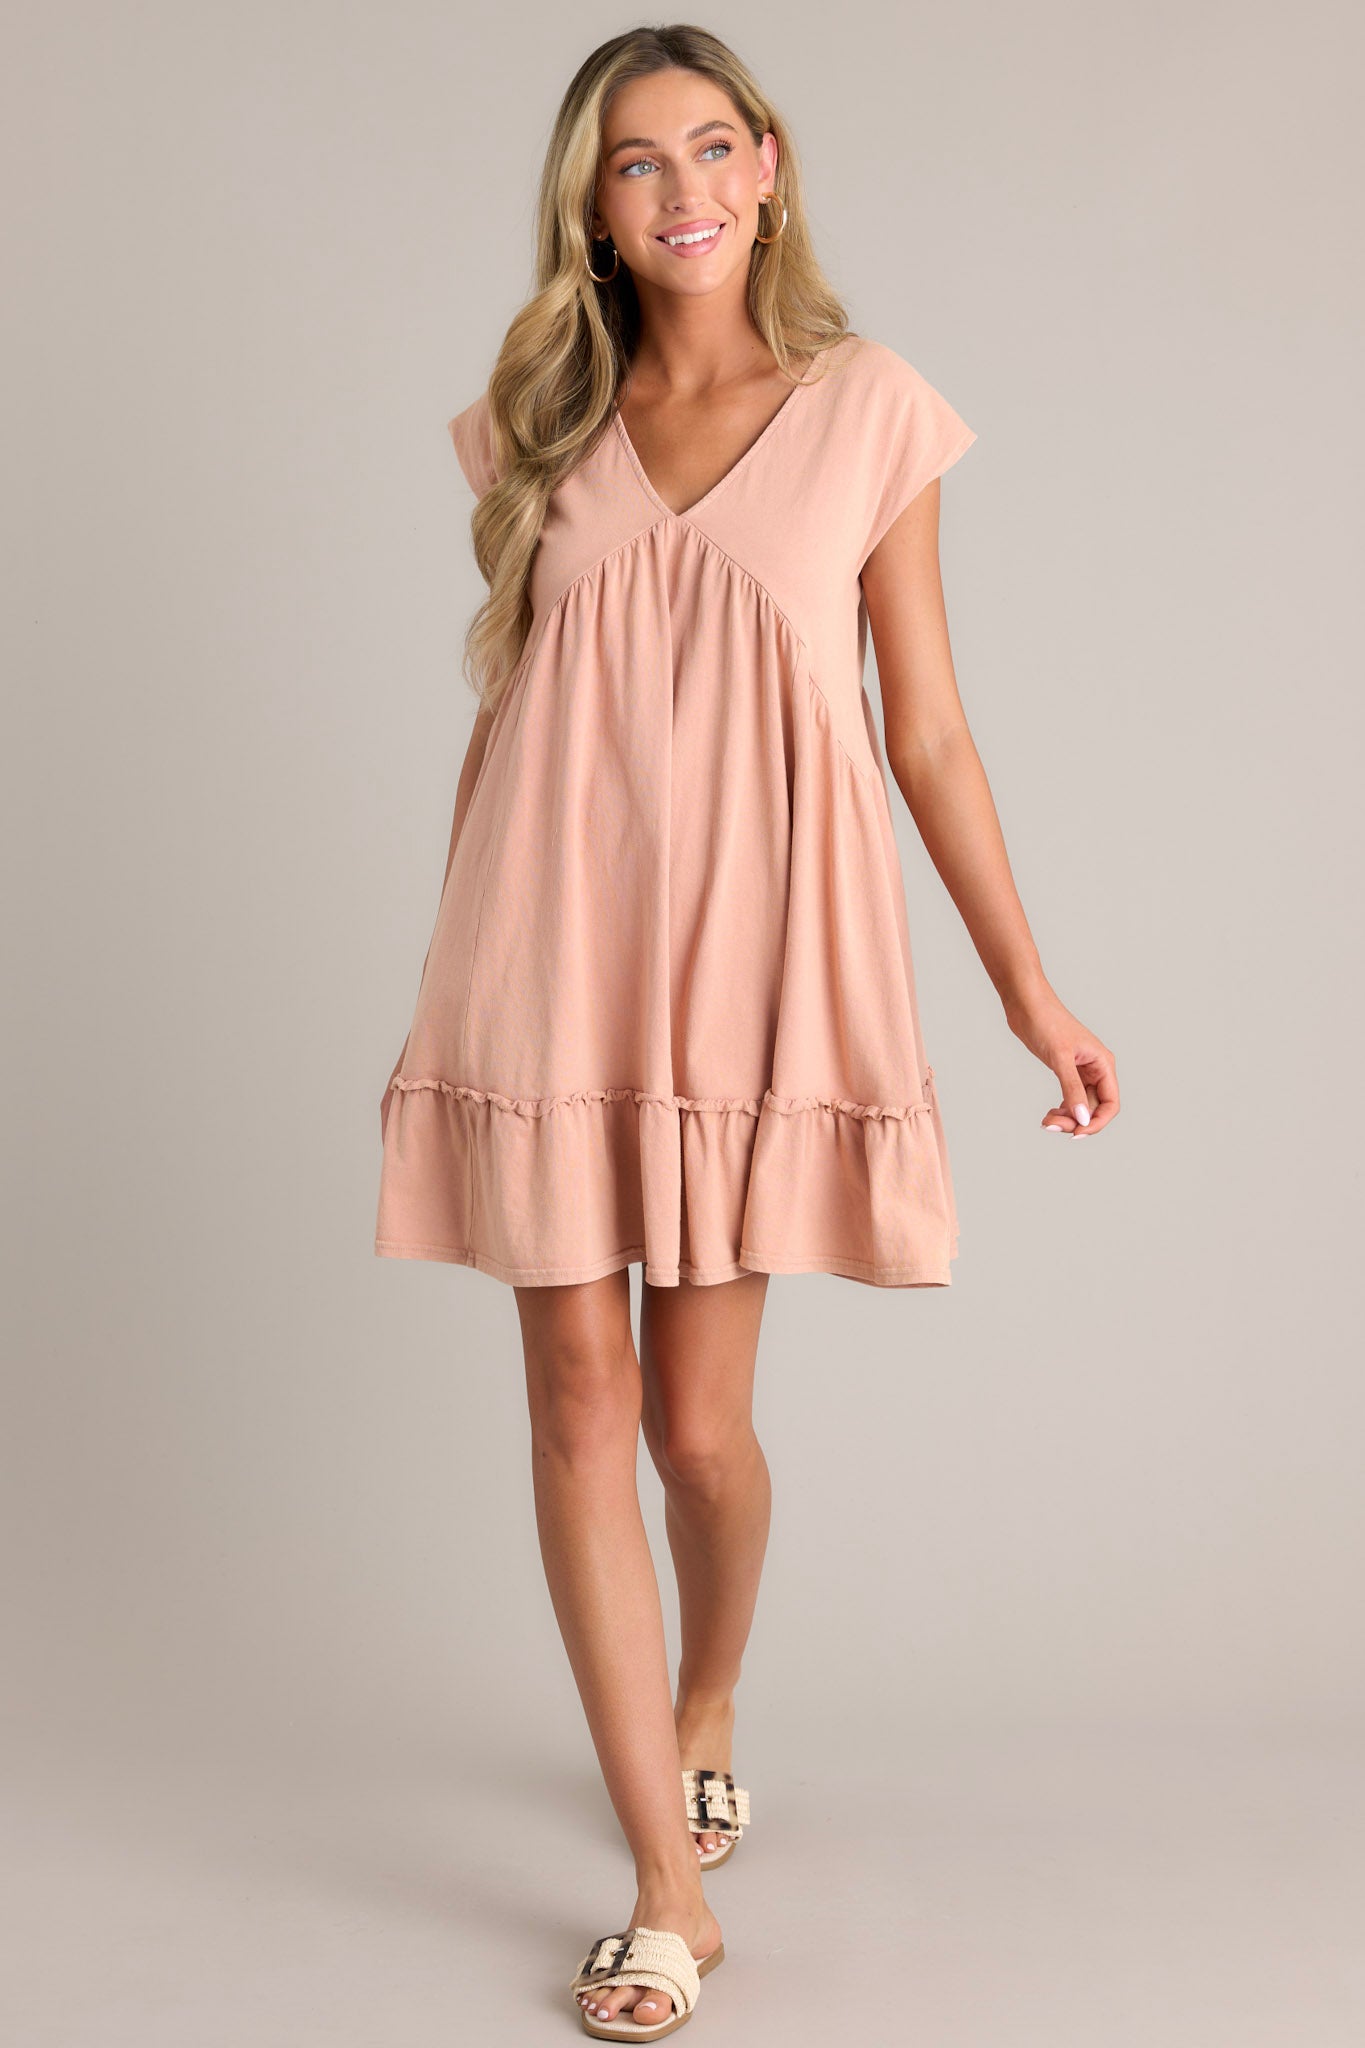 Action shot of a peach mini dress with a v-neckline, ruching below the bust line, and short cap sleeves, highlighting the flow and movement of the dress.